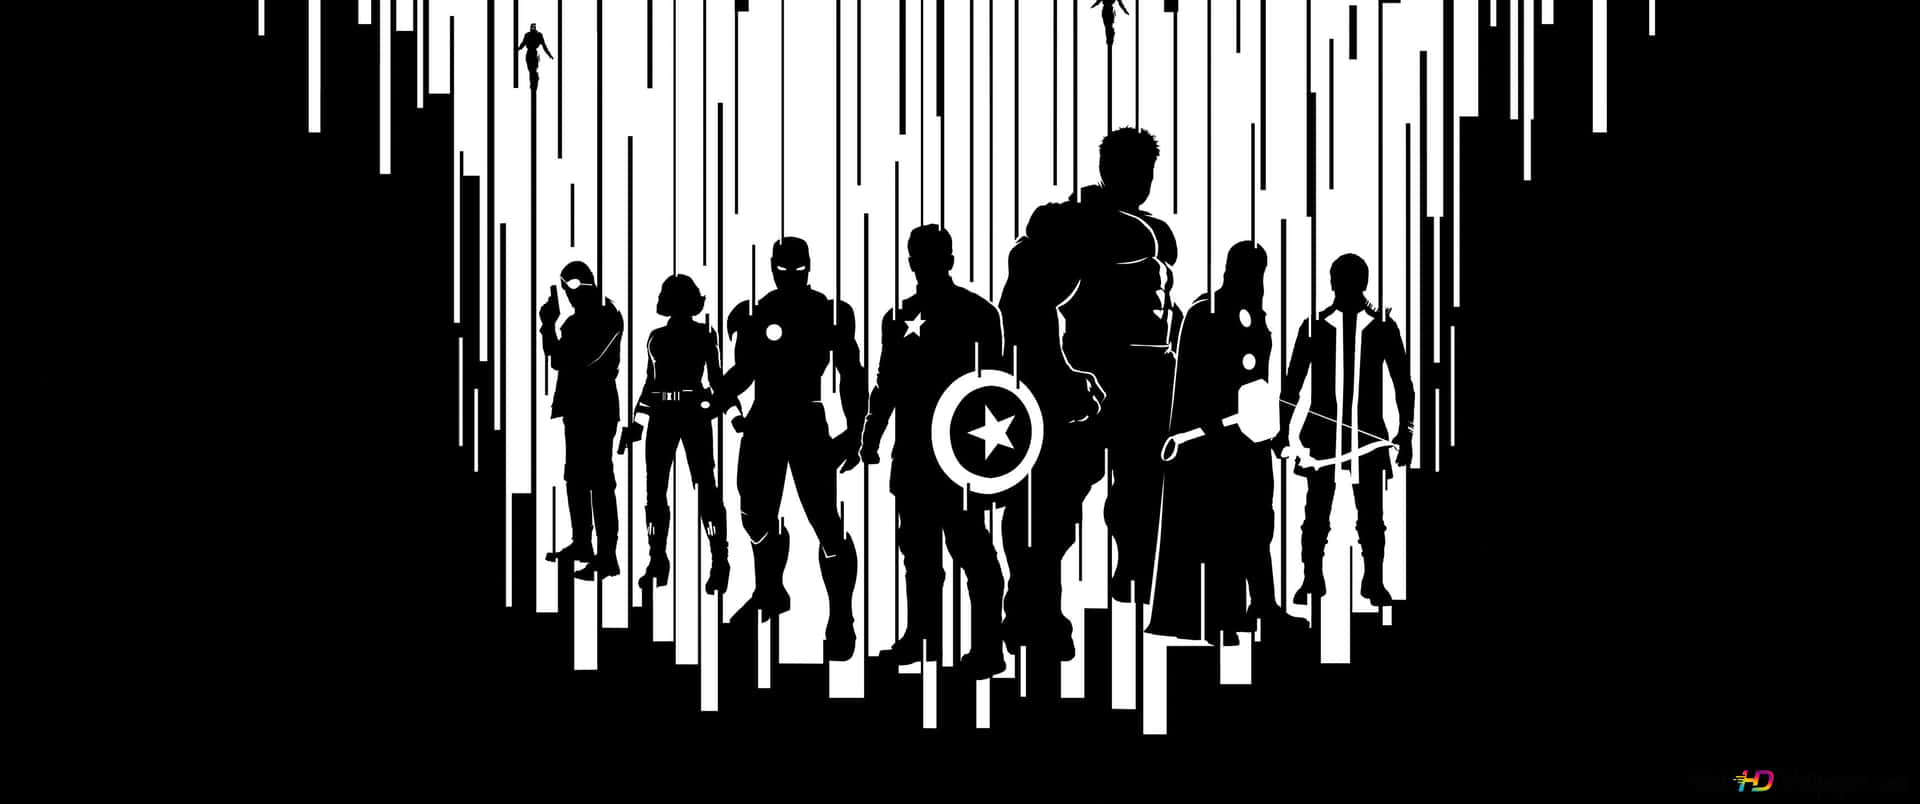 A classic Marvel-inspired black and white artwork that will fascinate any fan! Wallpaper